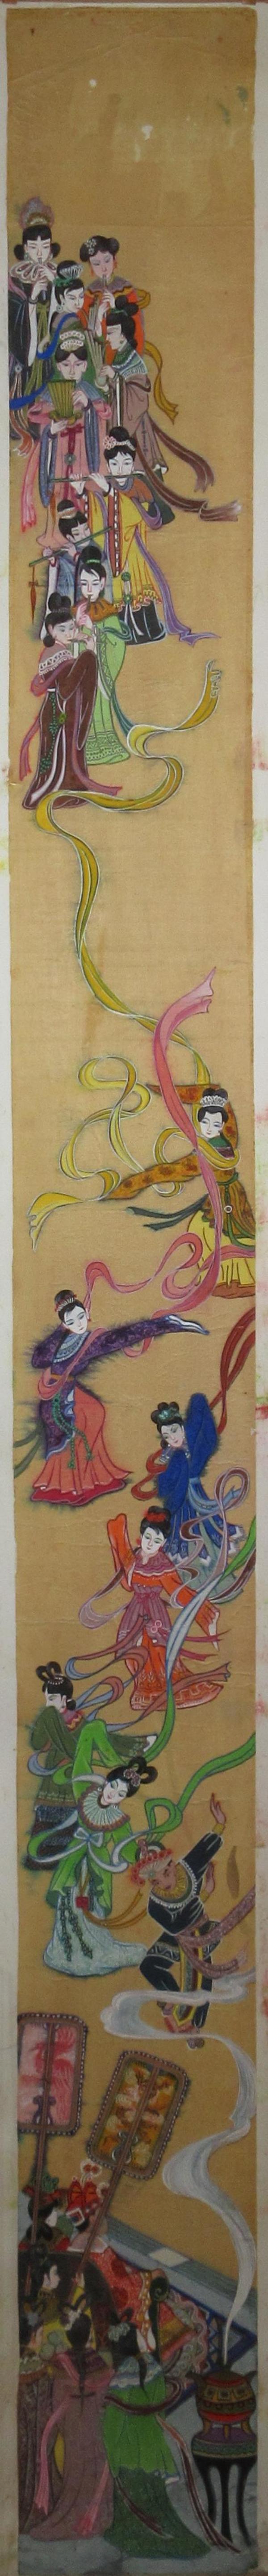 Court Dancers by Yee Wah Jung Attributed